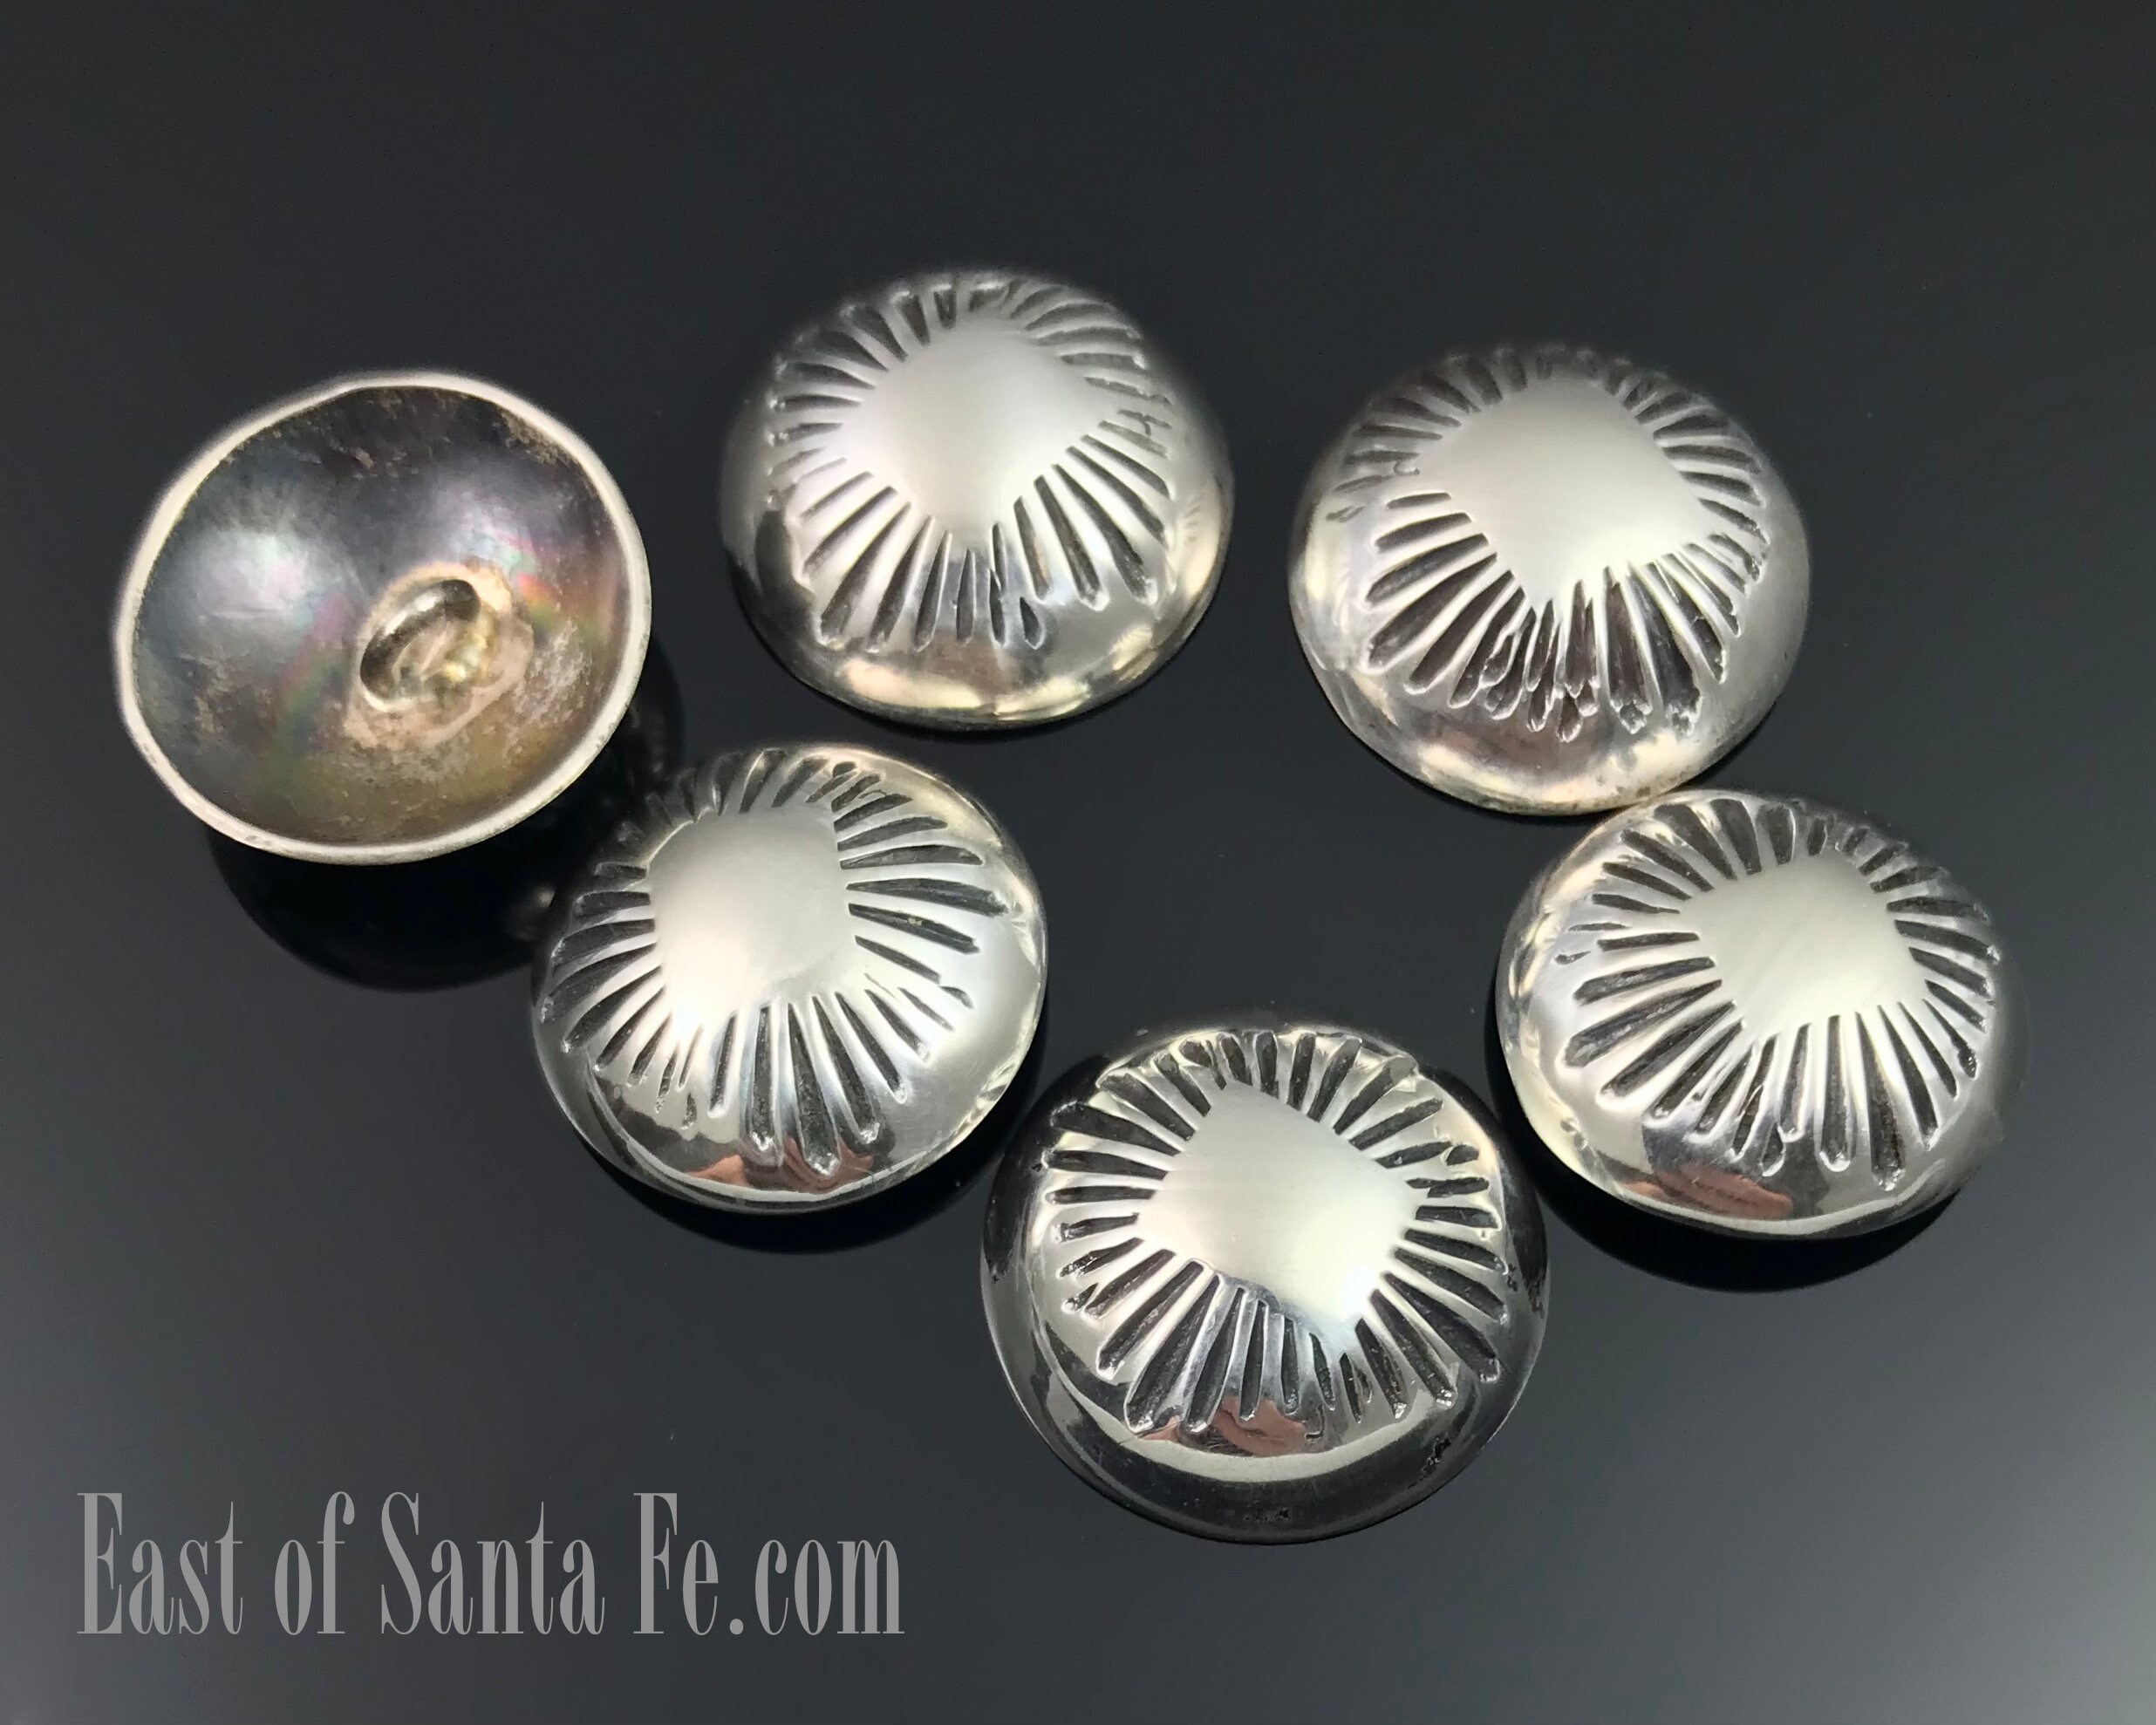 6 Sterling Silver Buttons, Oval Button Beads, Plain Buttons, 925